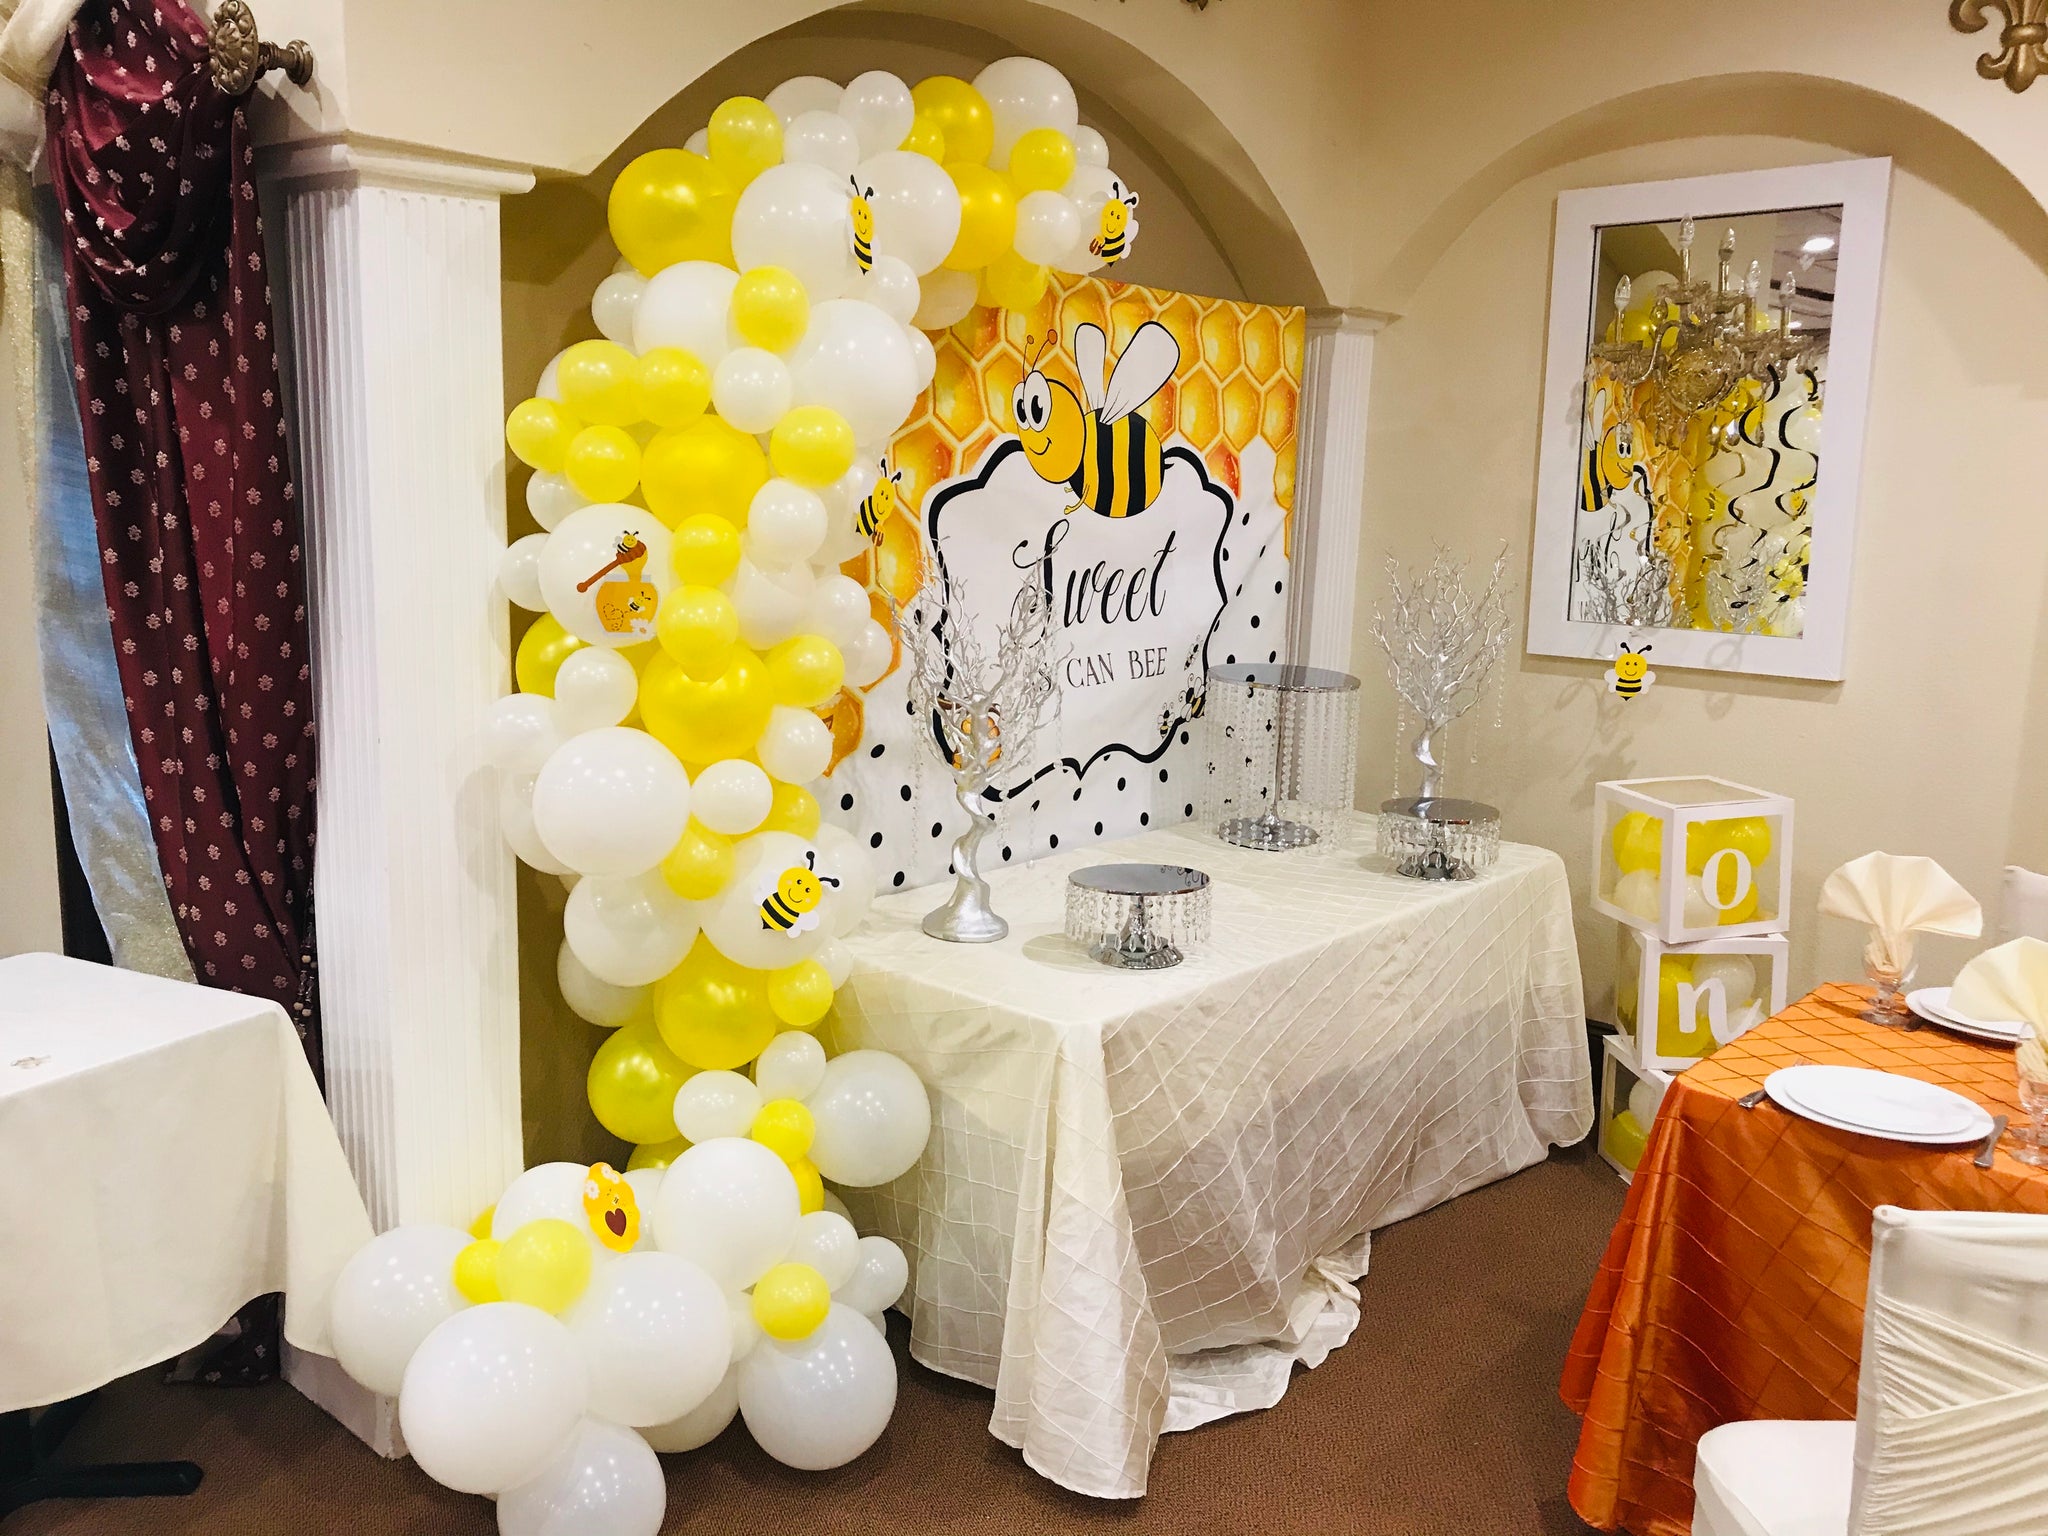 “Funny bees” balloons decorations